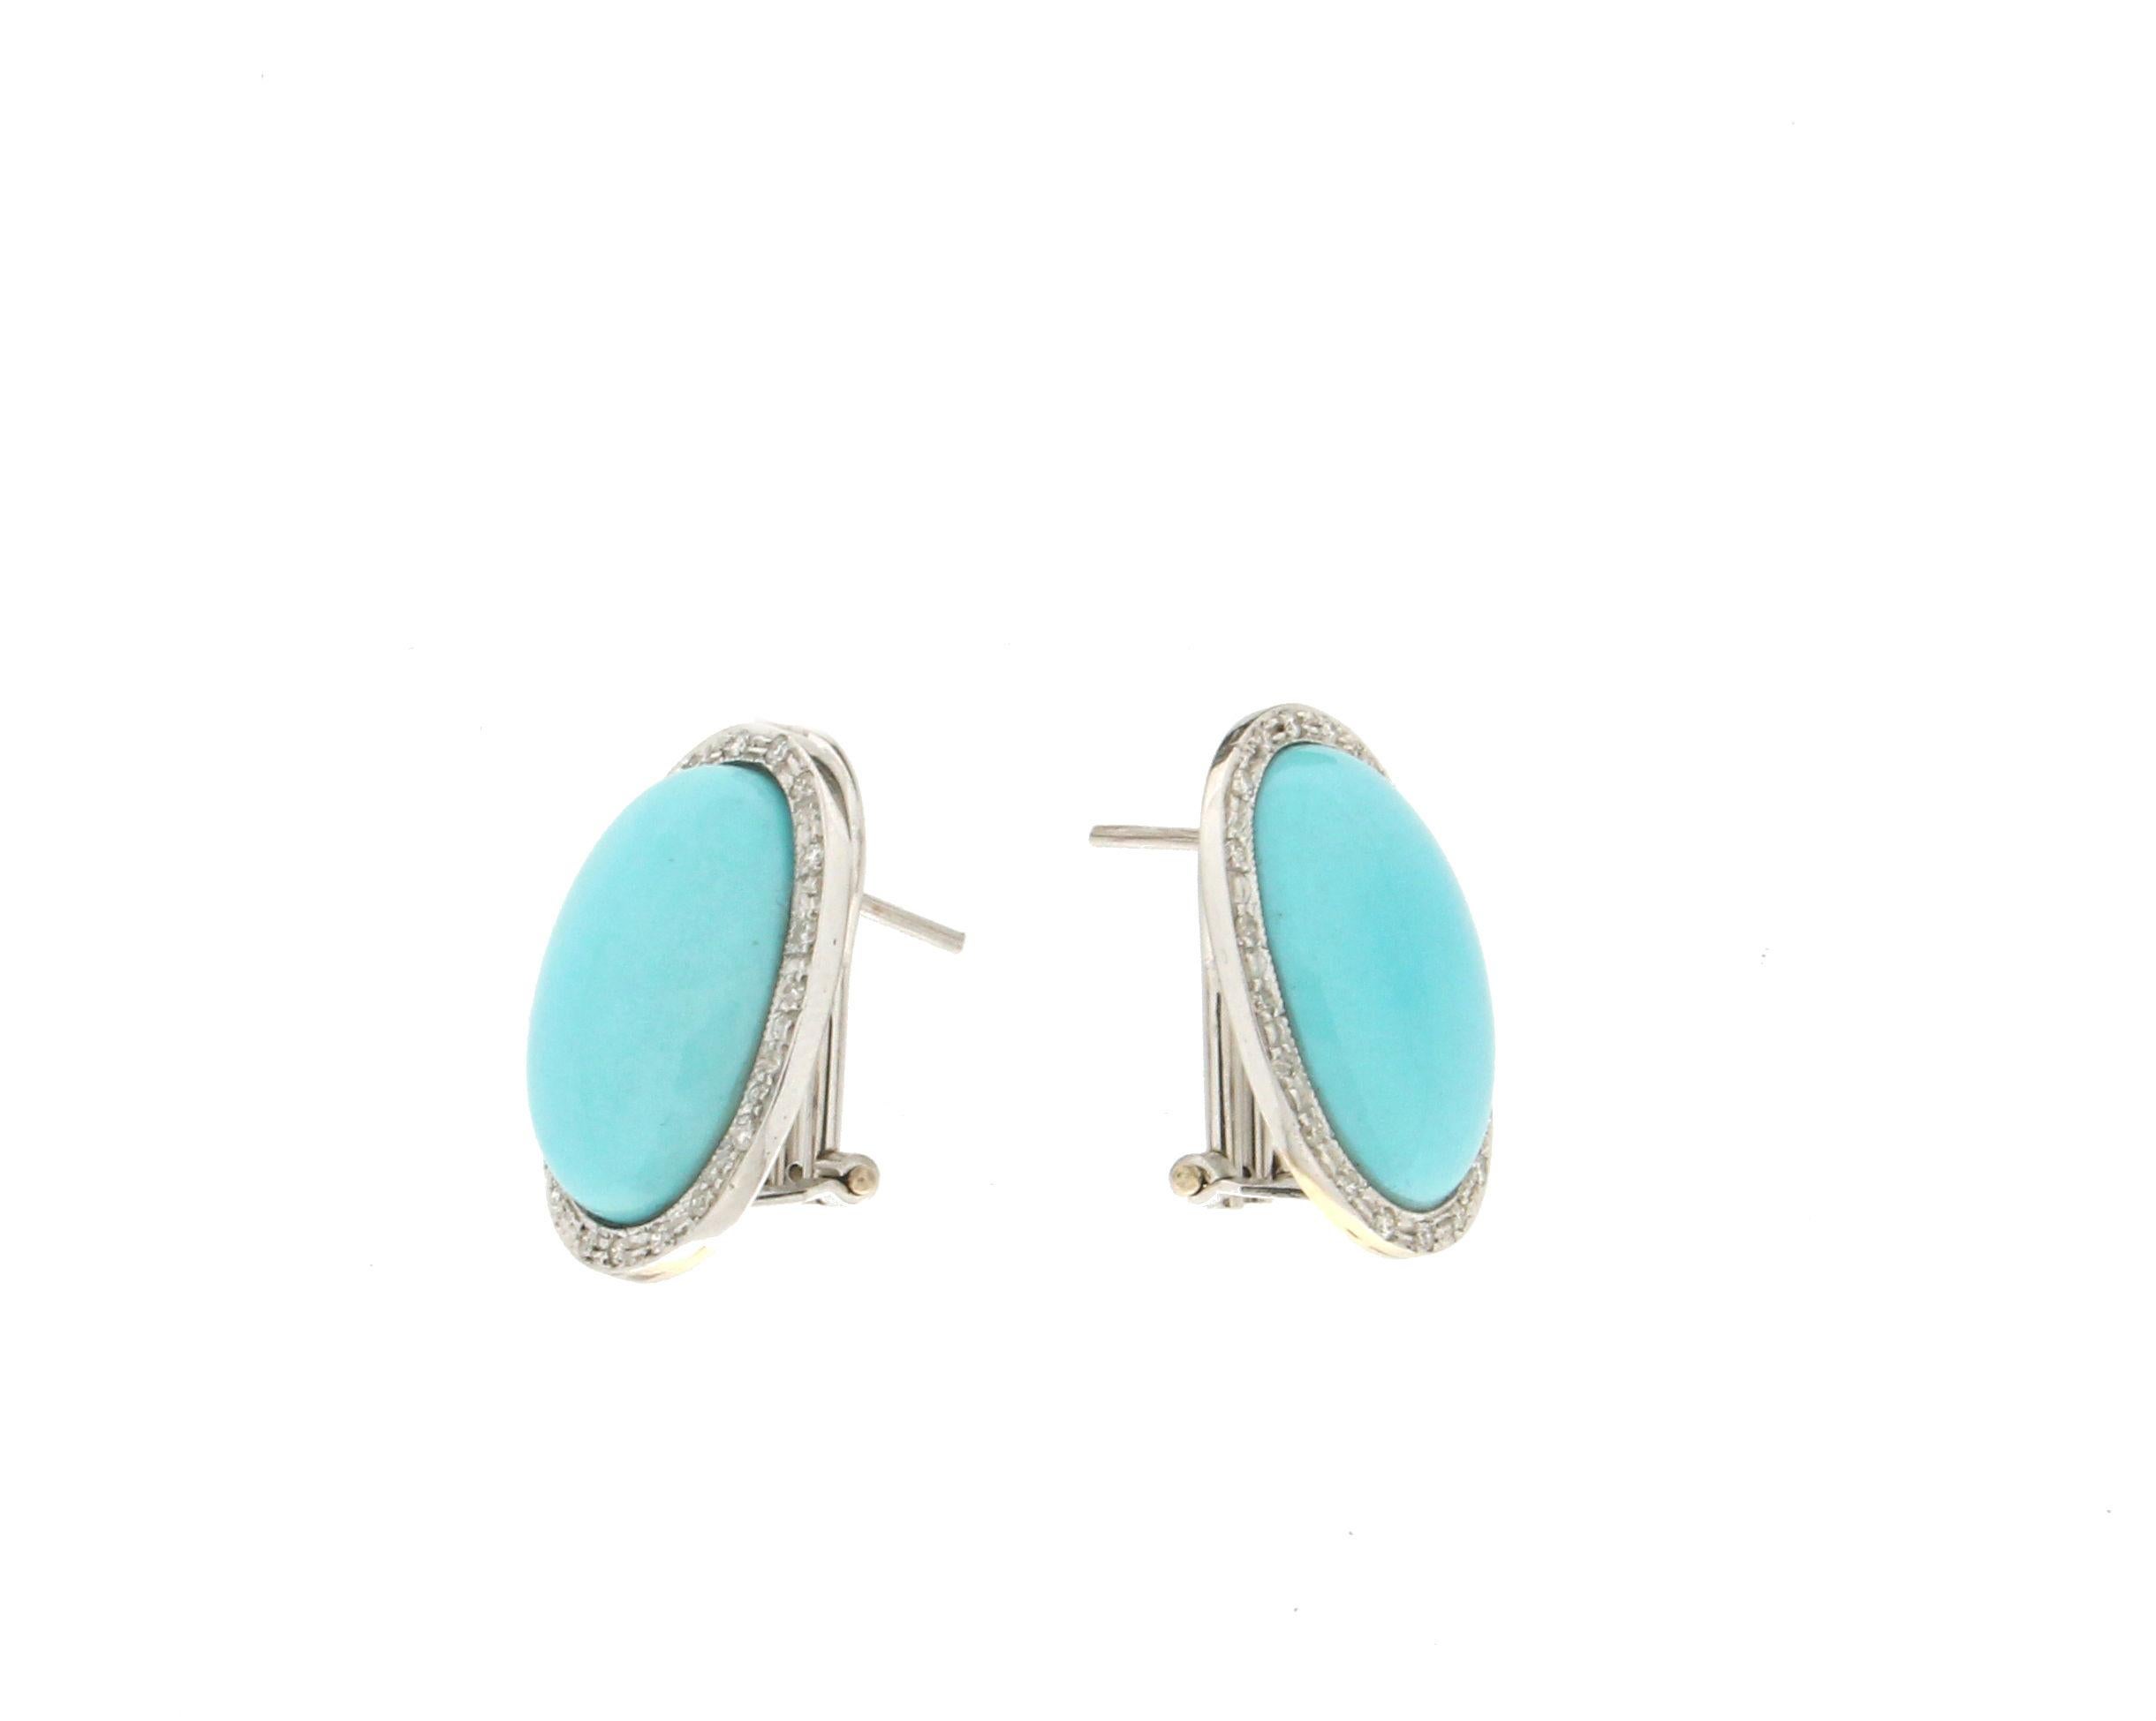 18 Karat white gold stud earrings. Handmade by our craftsmen assembled with turquoise and diamonds.

Diamonds weight 0.30 karat
Turquoise weight 9 grams
Earrings total weight 14.40 grams